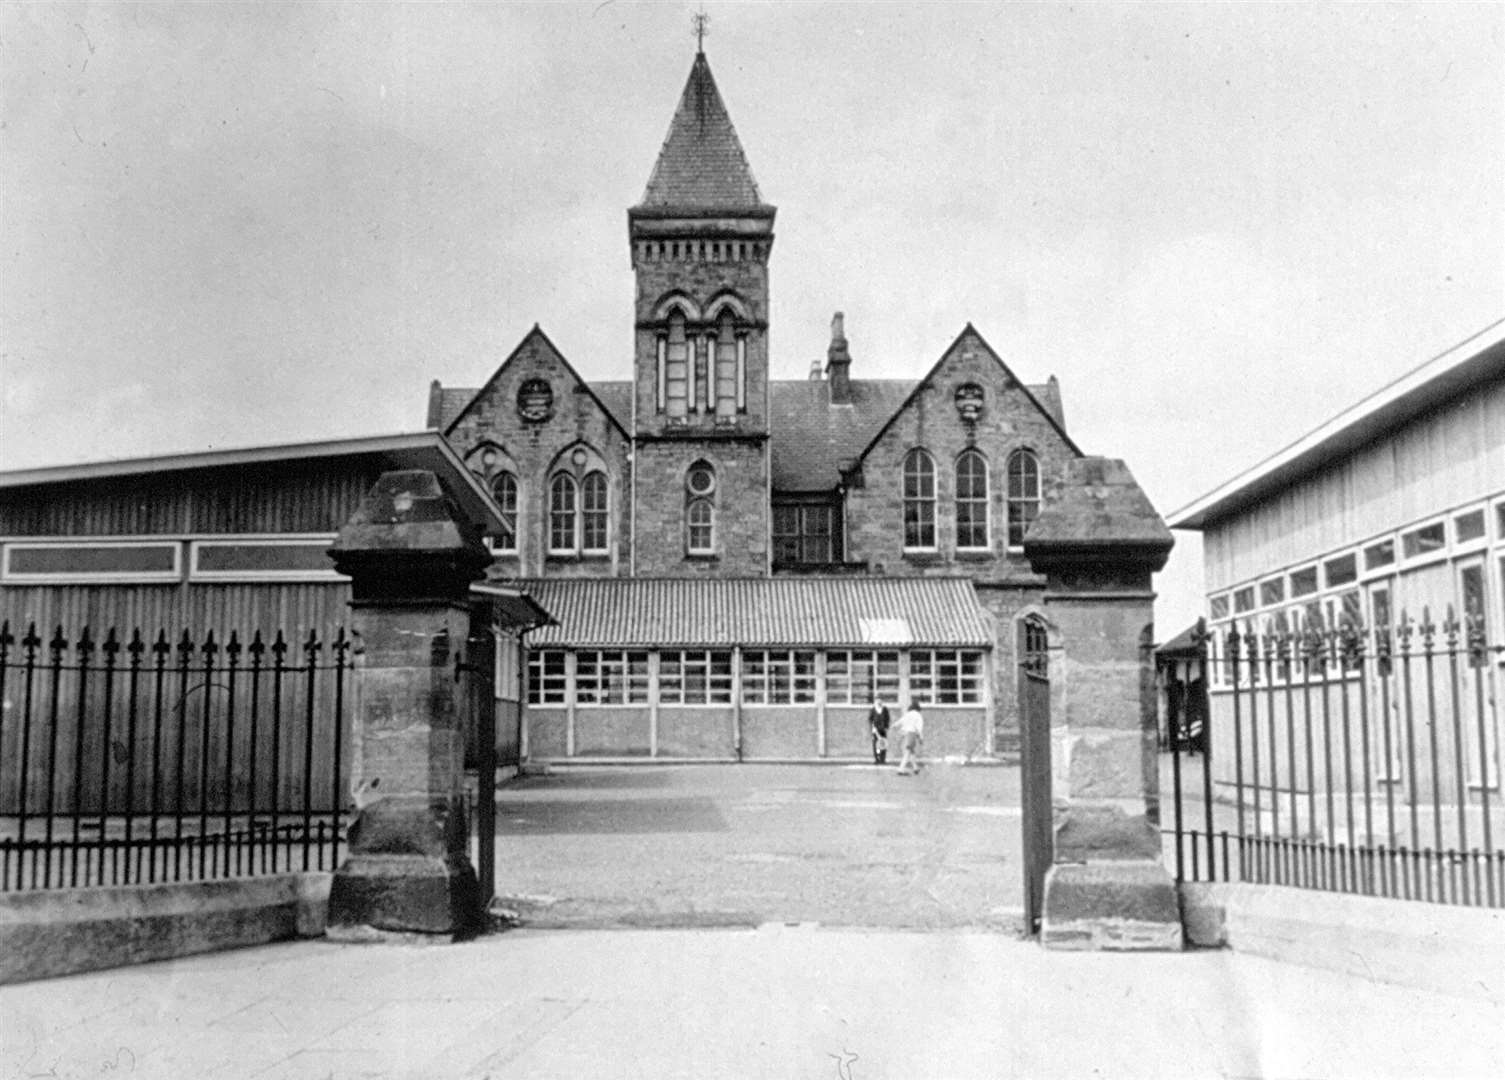 Forres Primary School was built in 1877 as the burgh school.